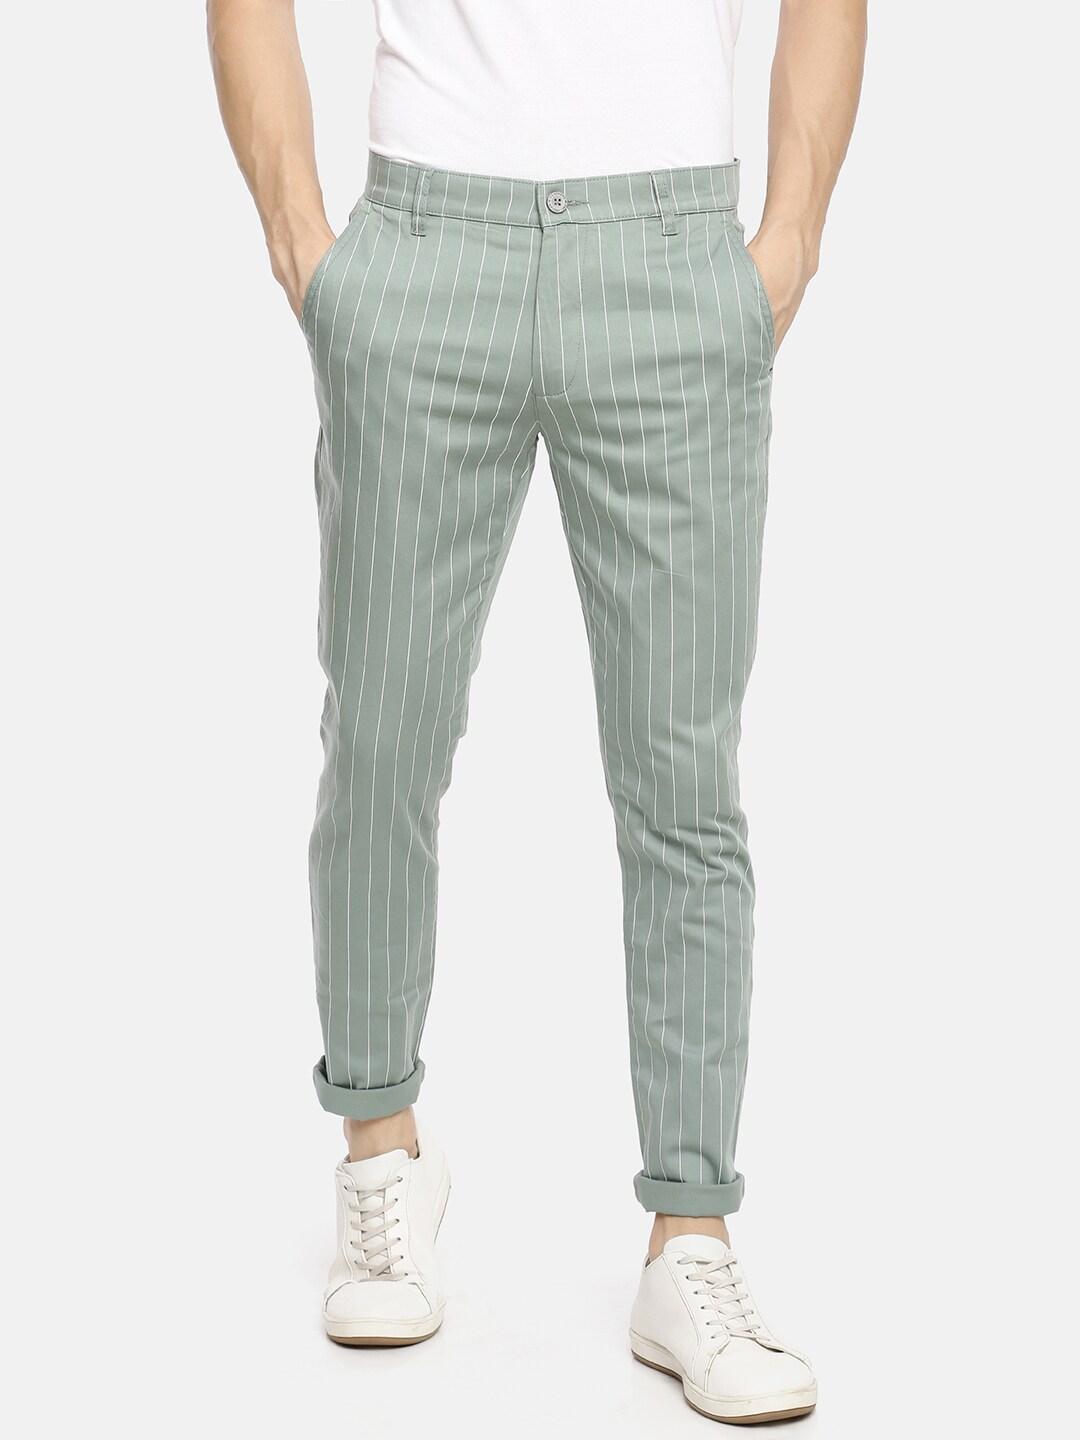 the-indian-garage-co-men-green-&-white-slim-fit-striped-chinos